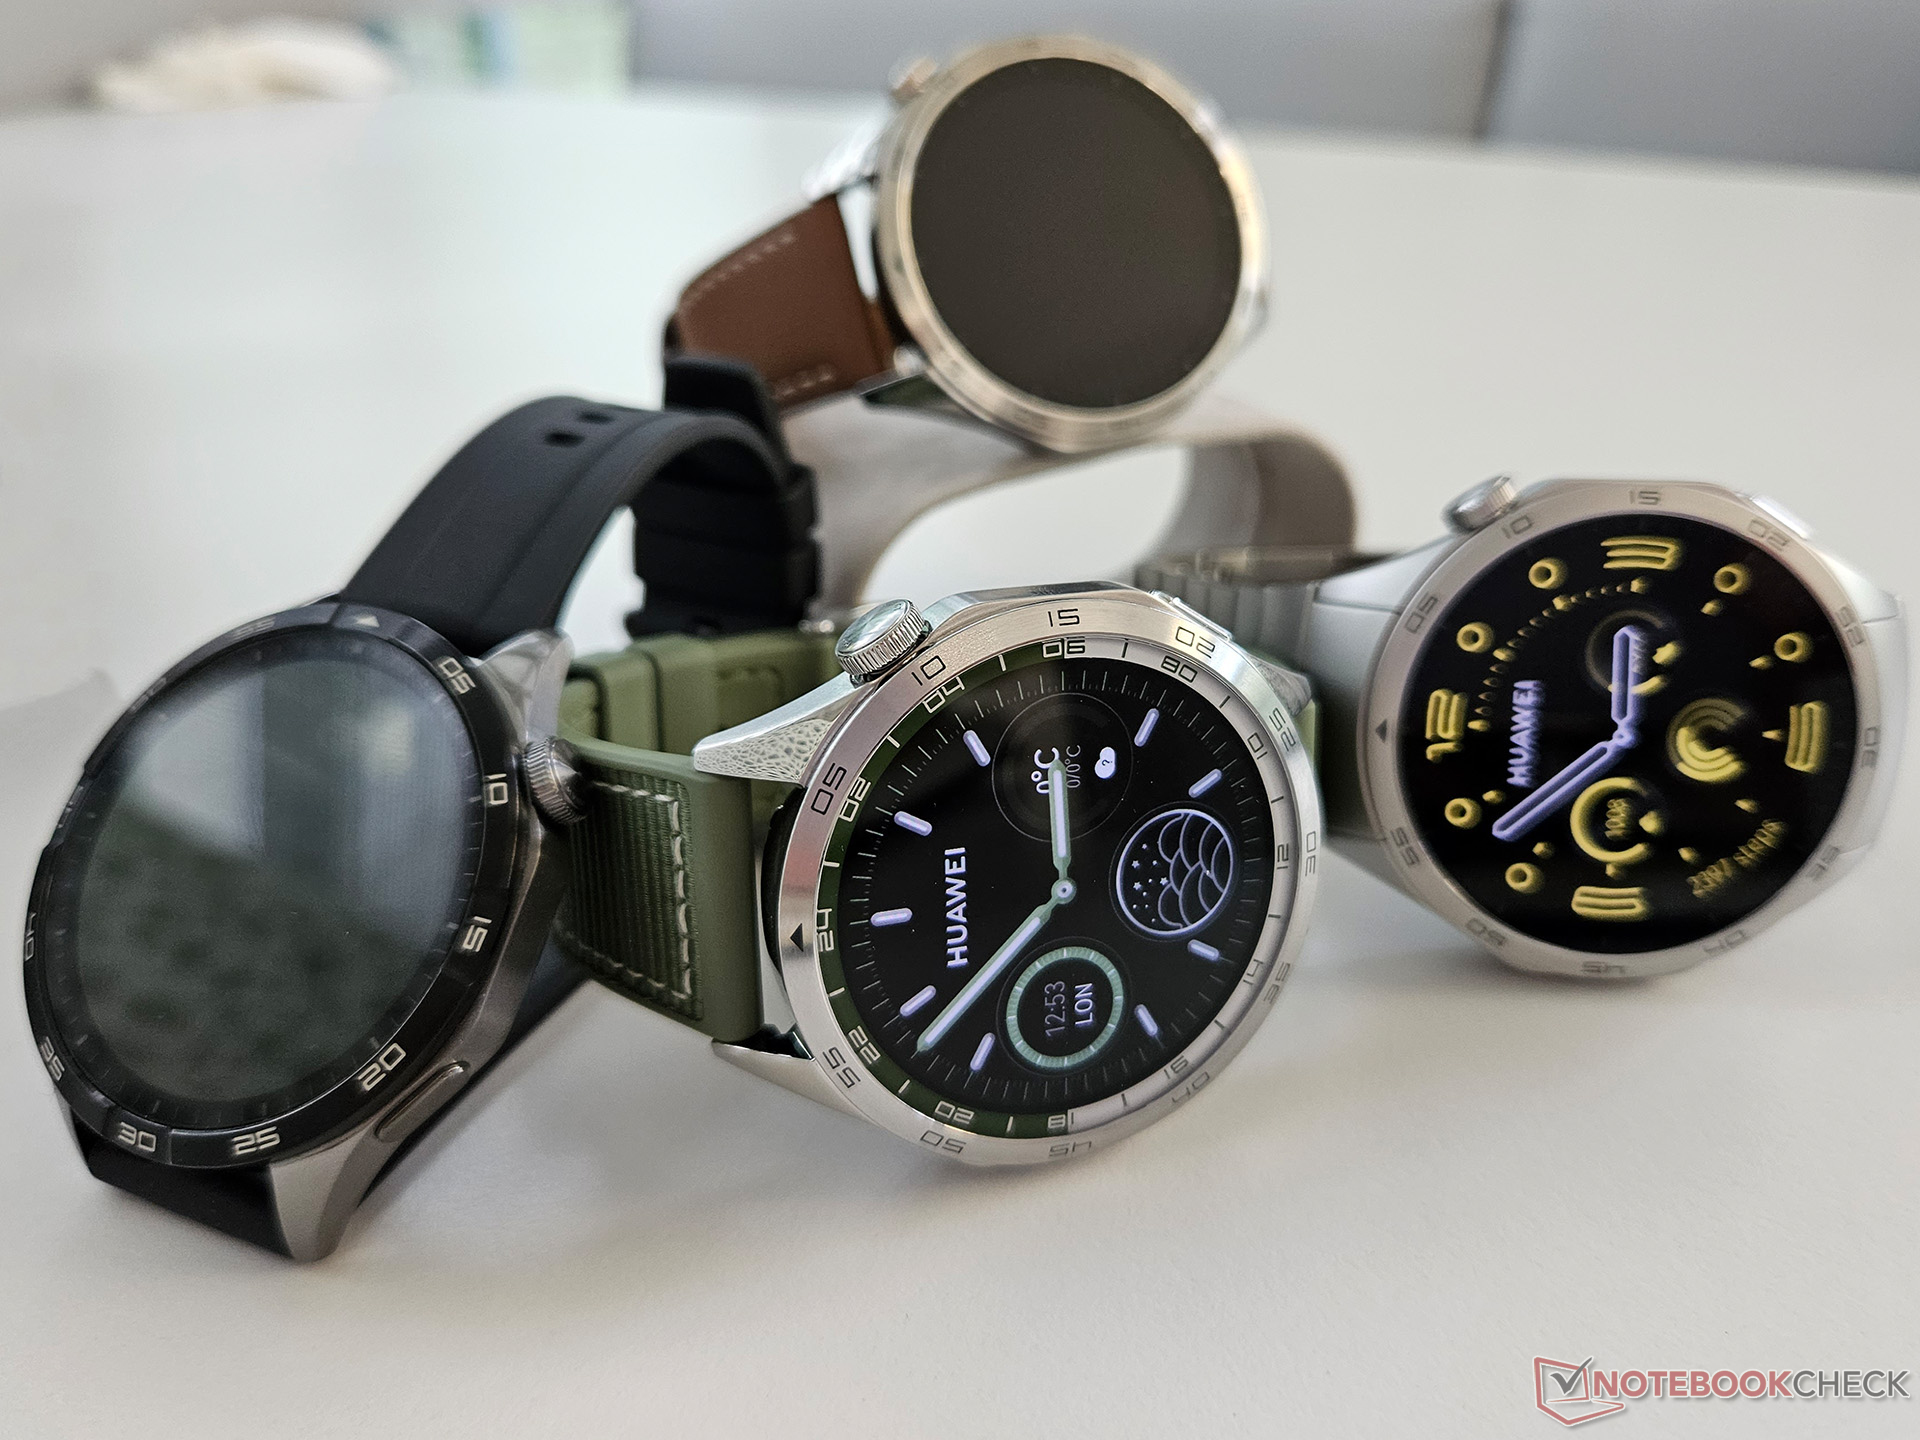 Huawei Watch Ultimate global launch on April 4 - Huawei Central